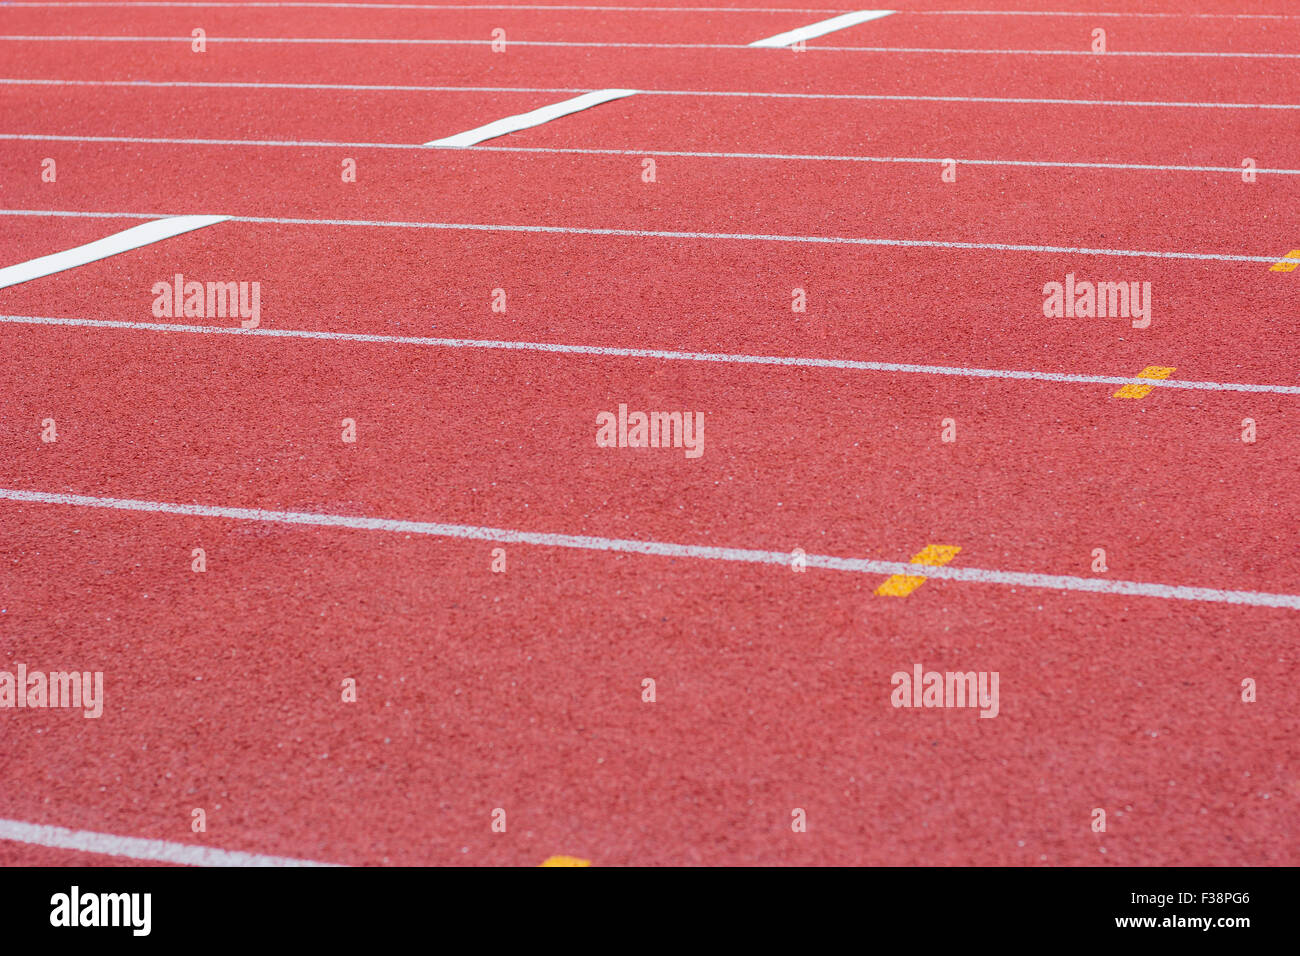 Yard line, running track, athletics track, a red, white ground. Stock Photo